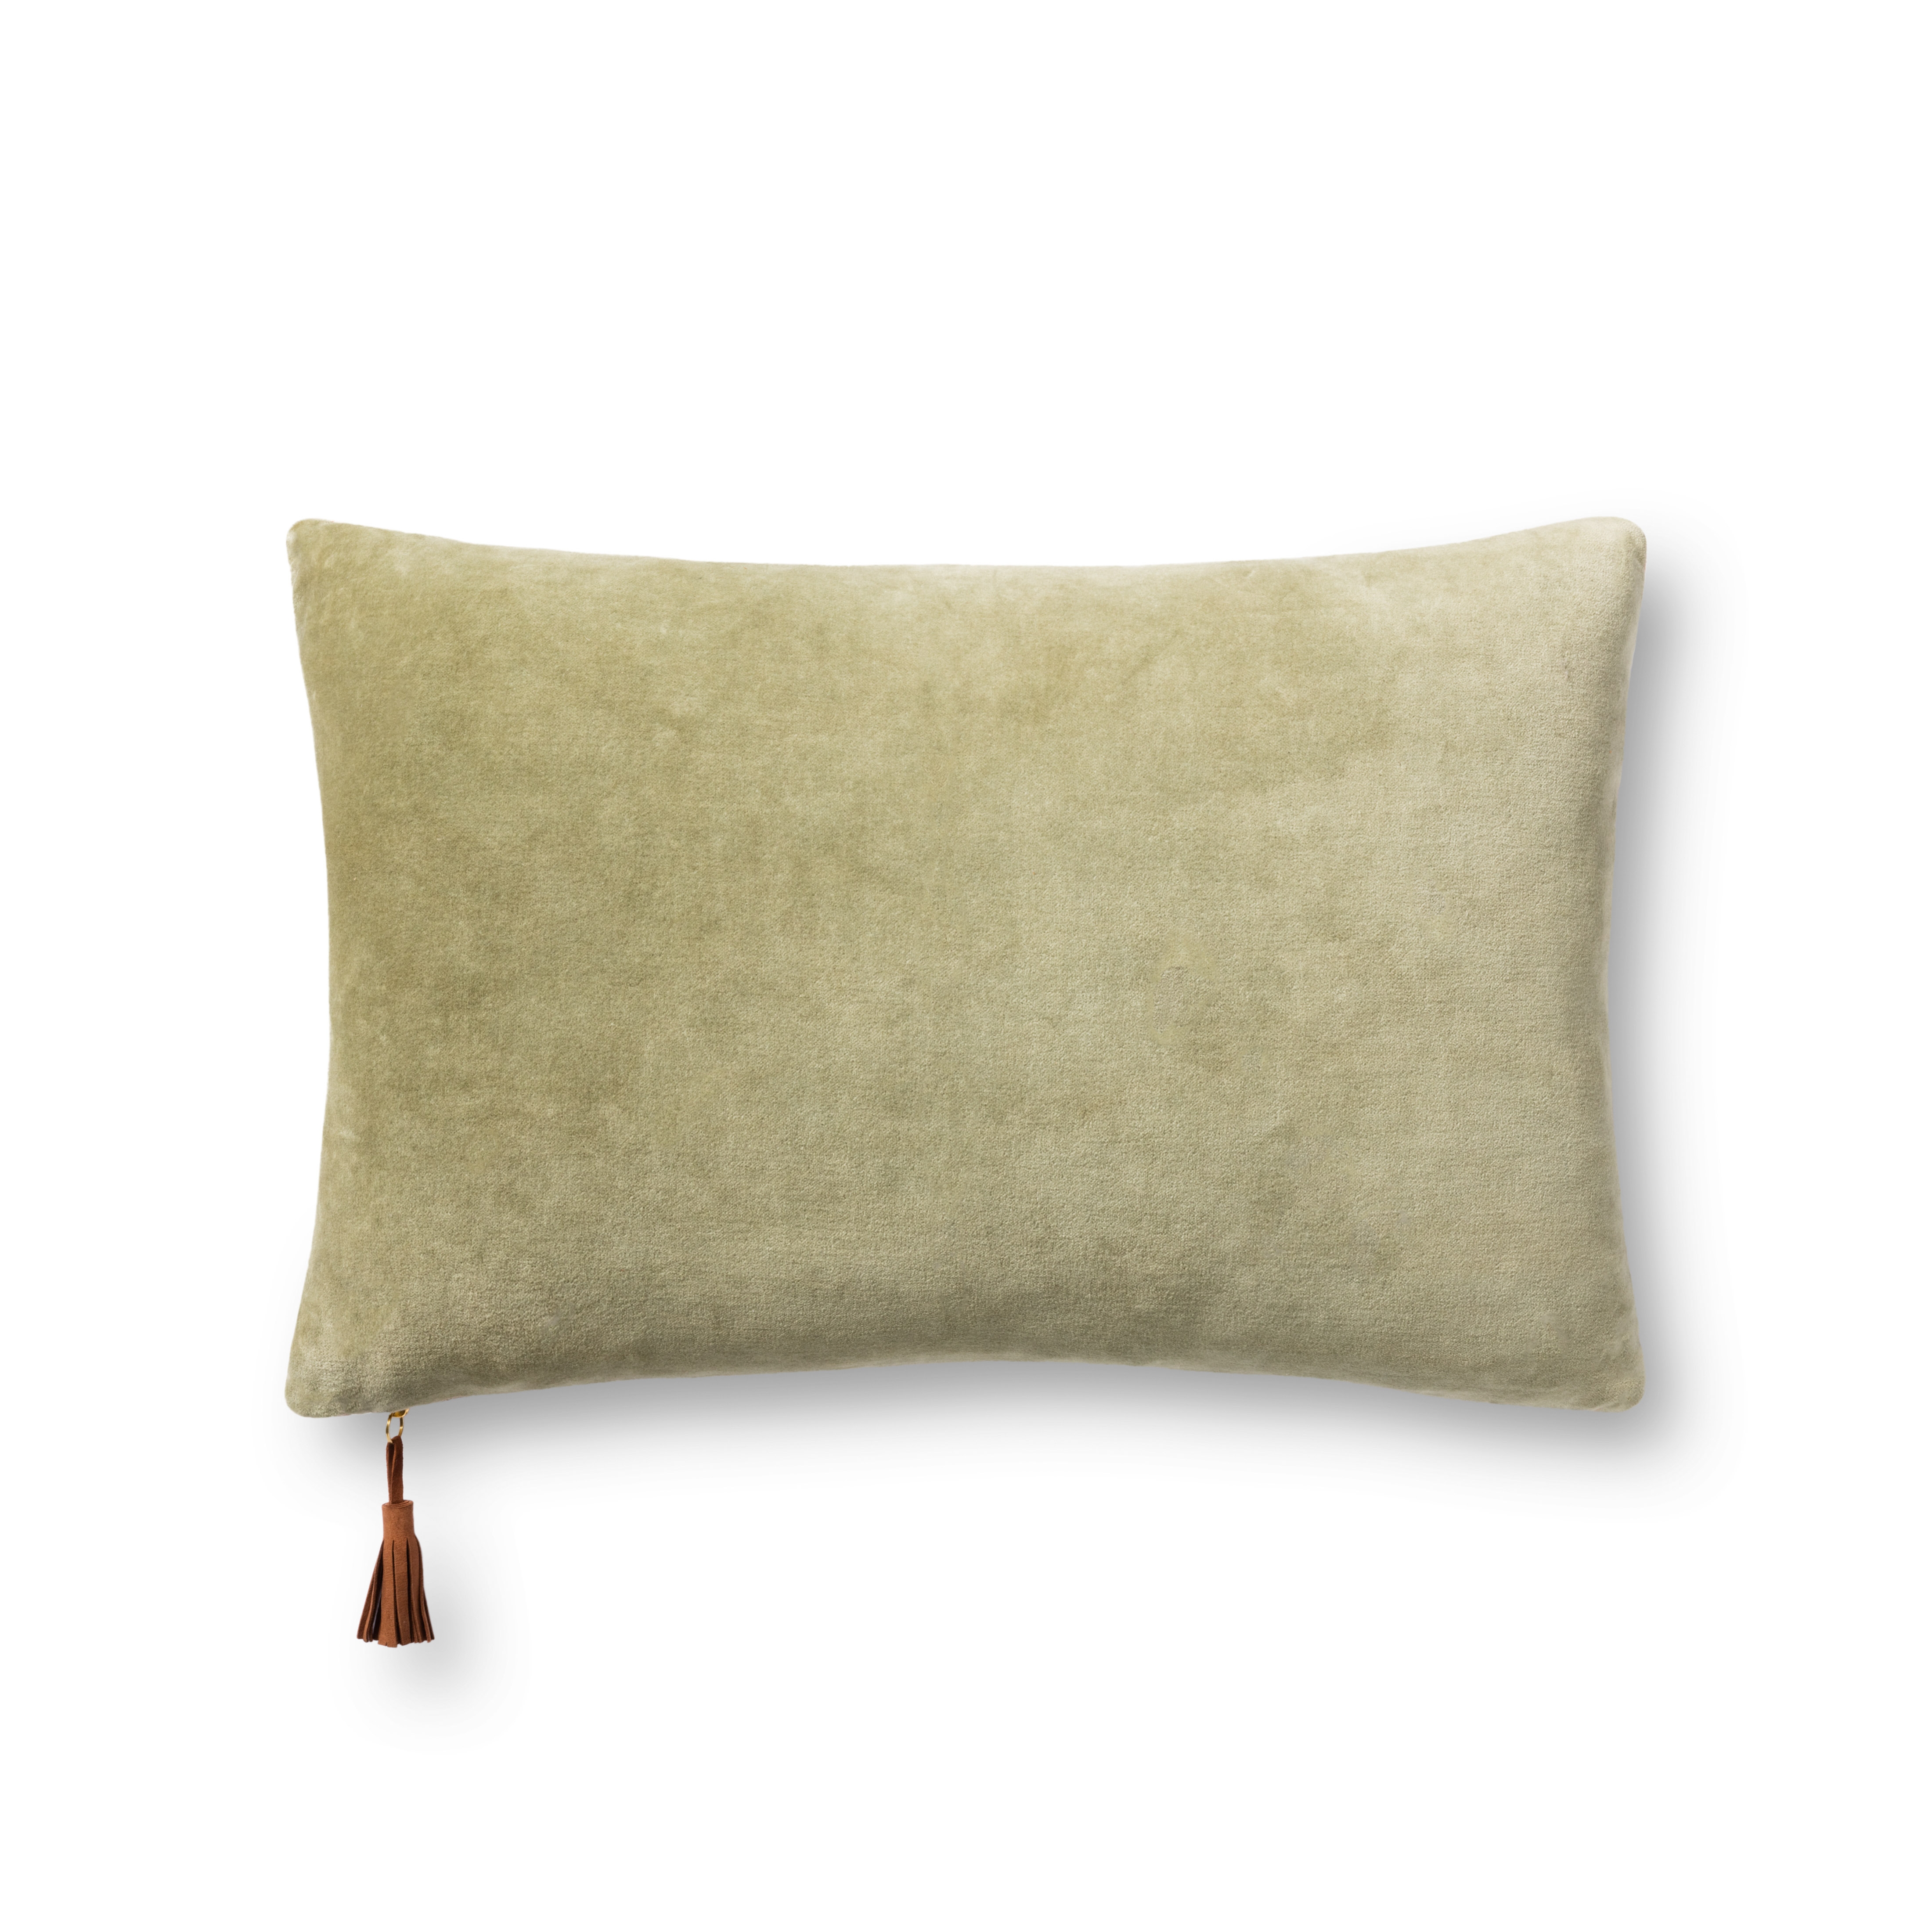 Magnolia Home by Joanna Gaines x Loloi Pillows P1153 Sage / Sand 13" x 21" Cover Only - Image 0